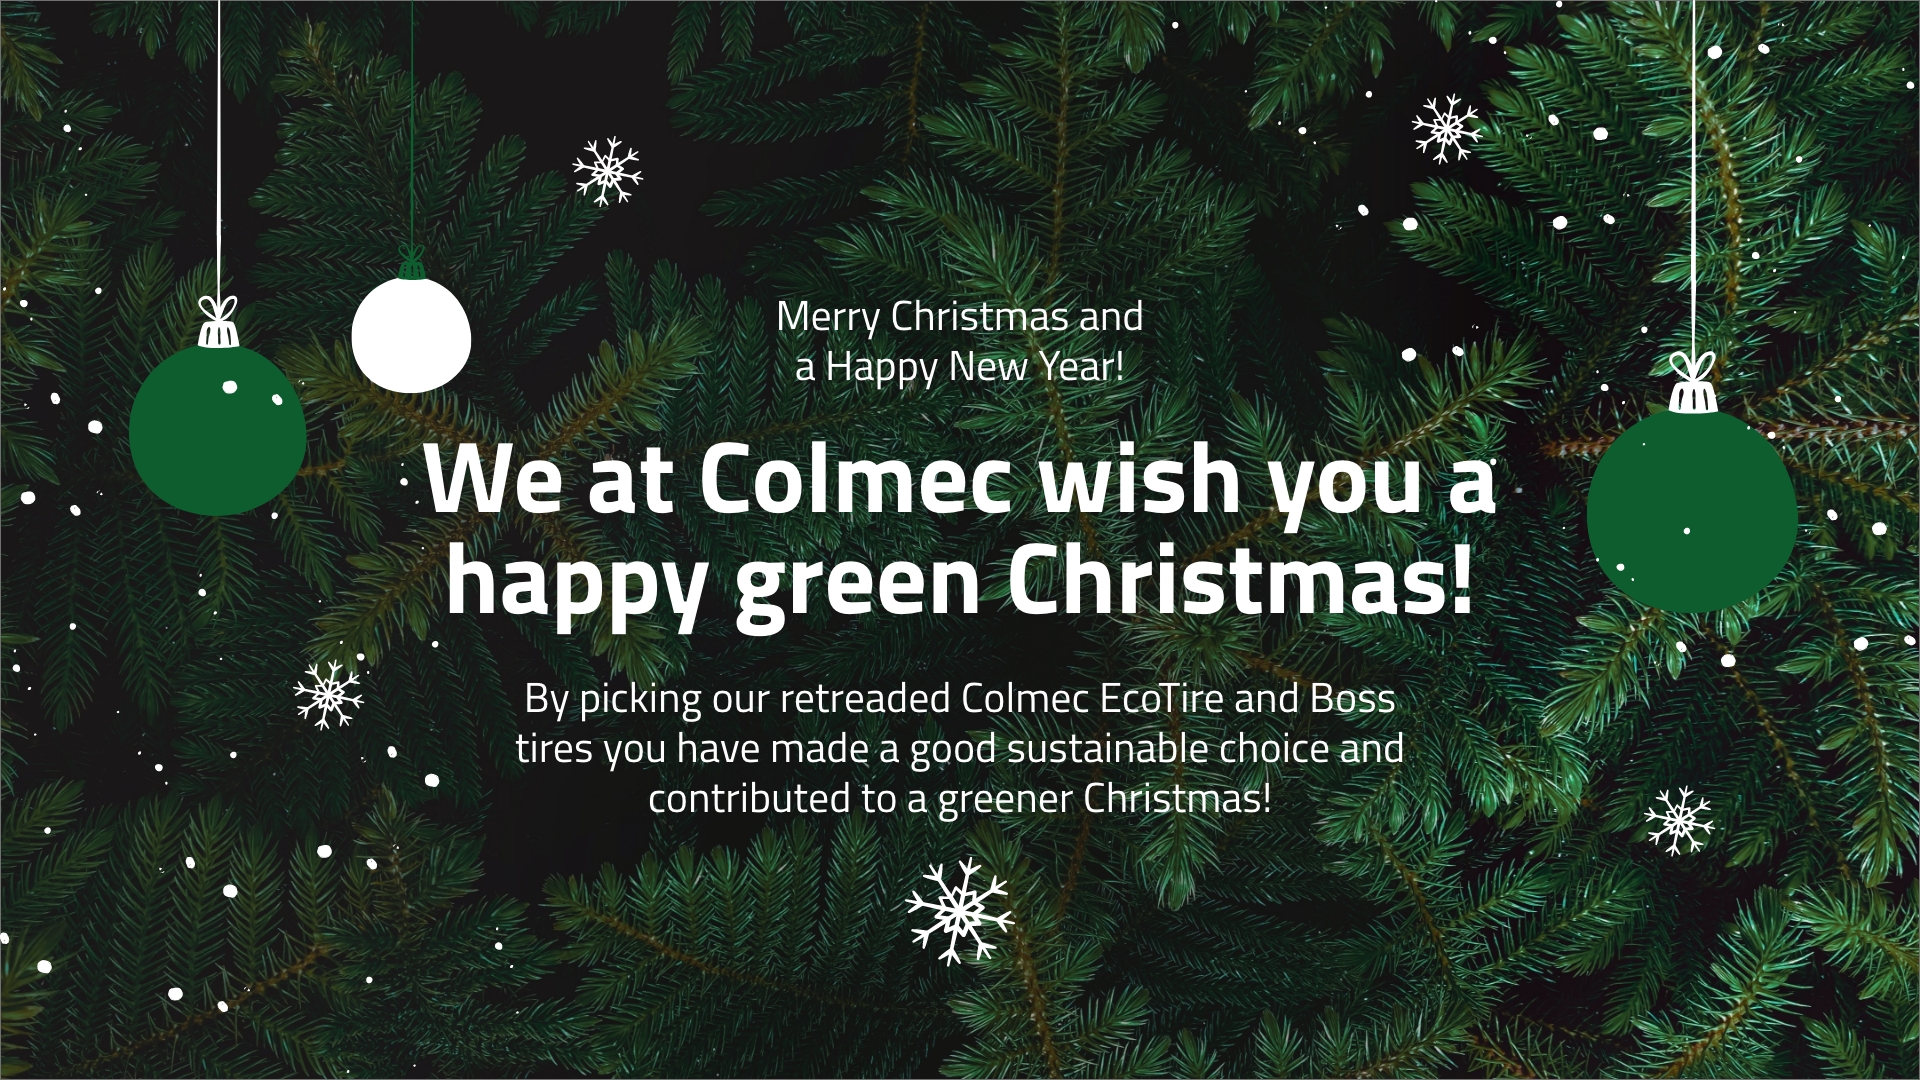 We at Colmec wish you a happy green Christmas!